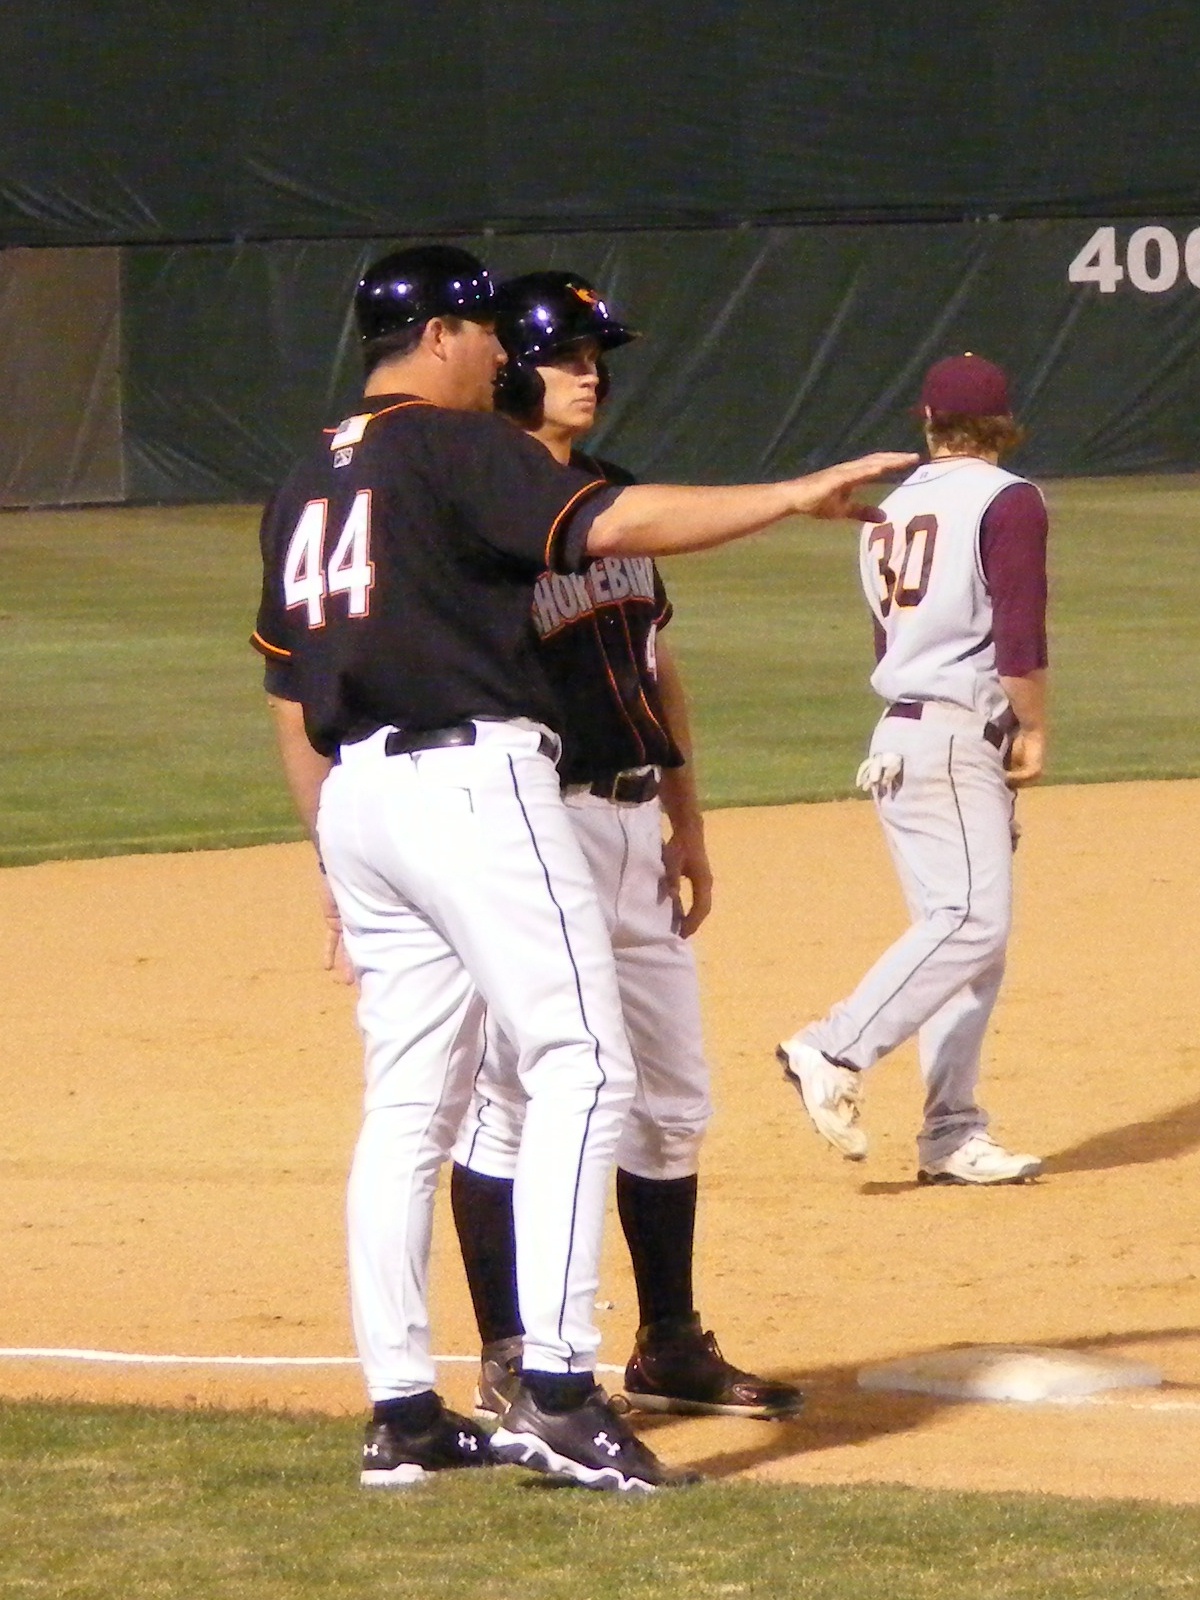 Standing at third, Mike Planeta consults with manager Ryan Minor. Photo by Kimberley Corkran.